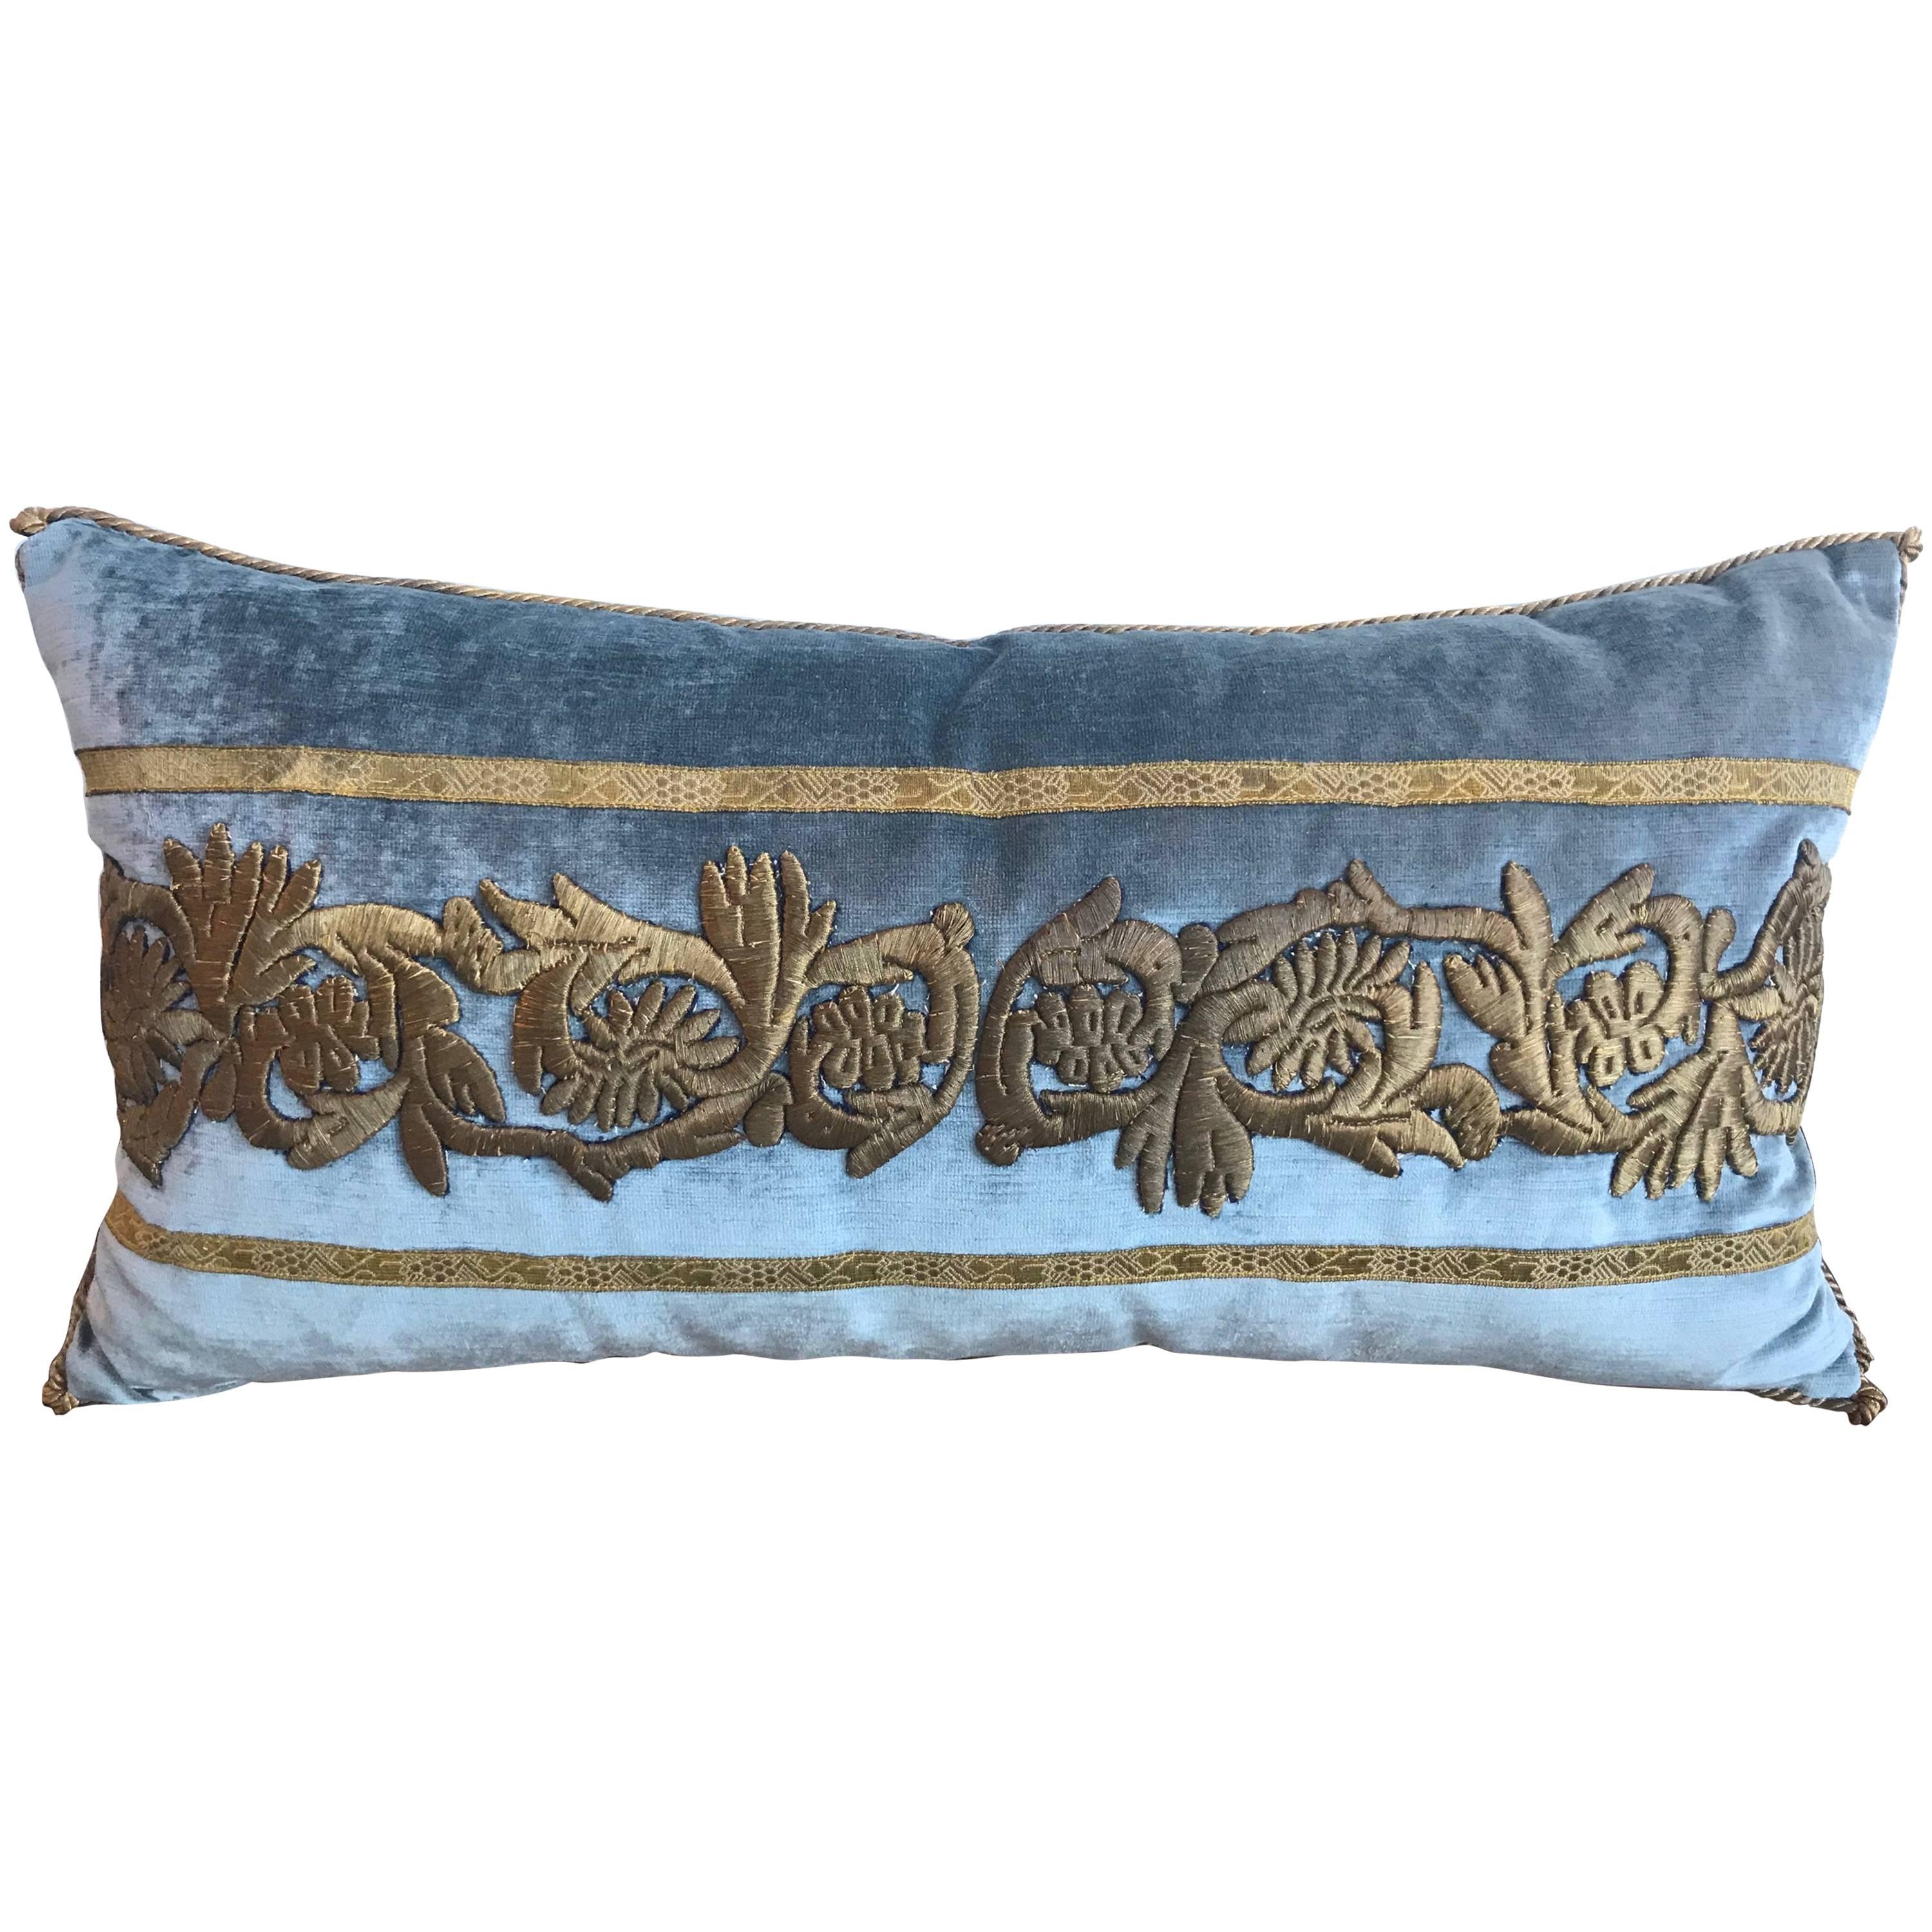 Antique Embroidery Pillow For Sale